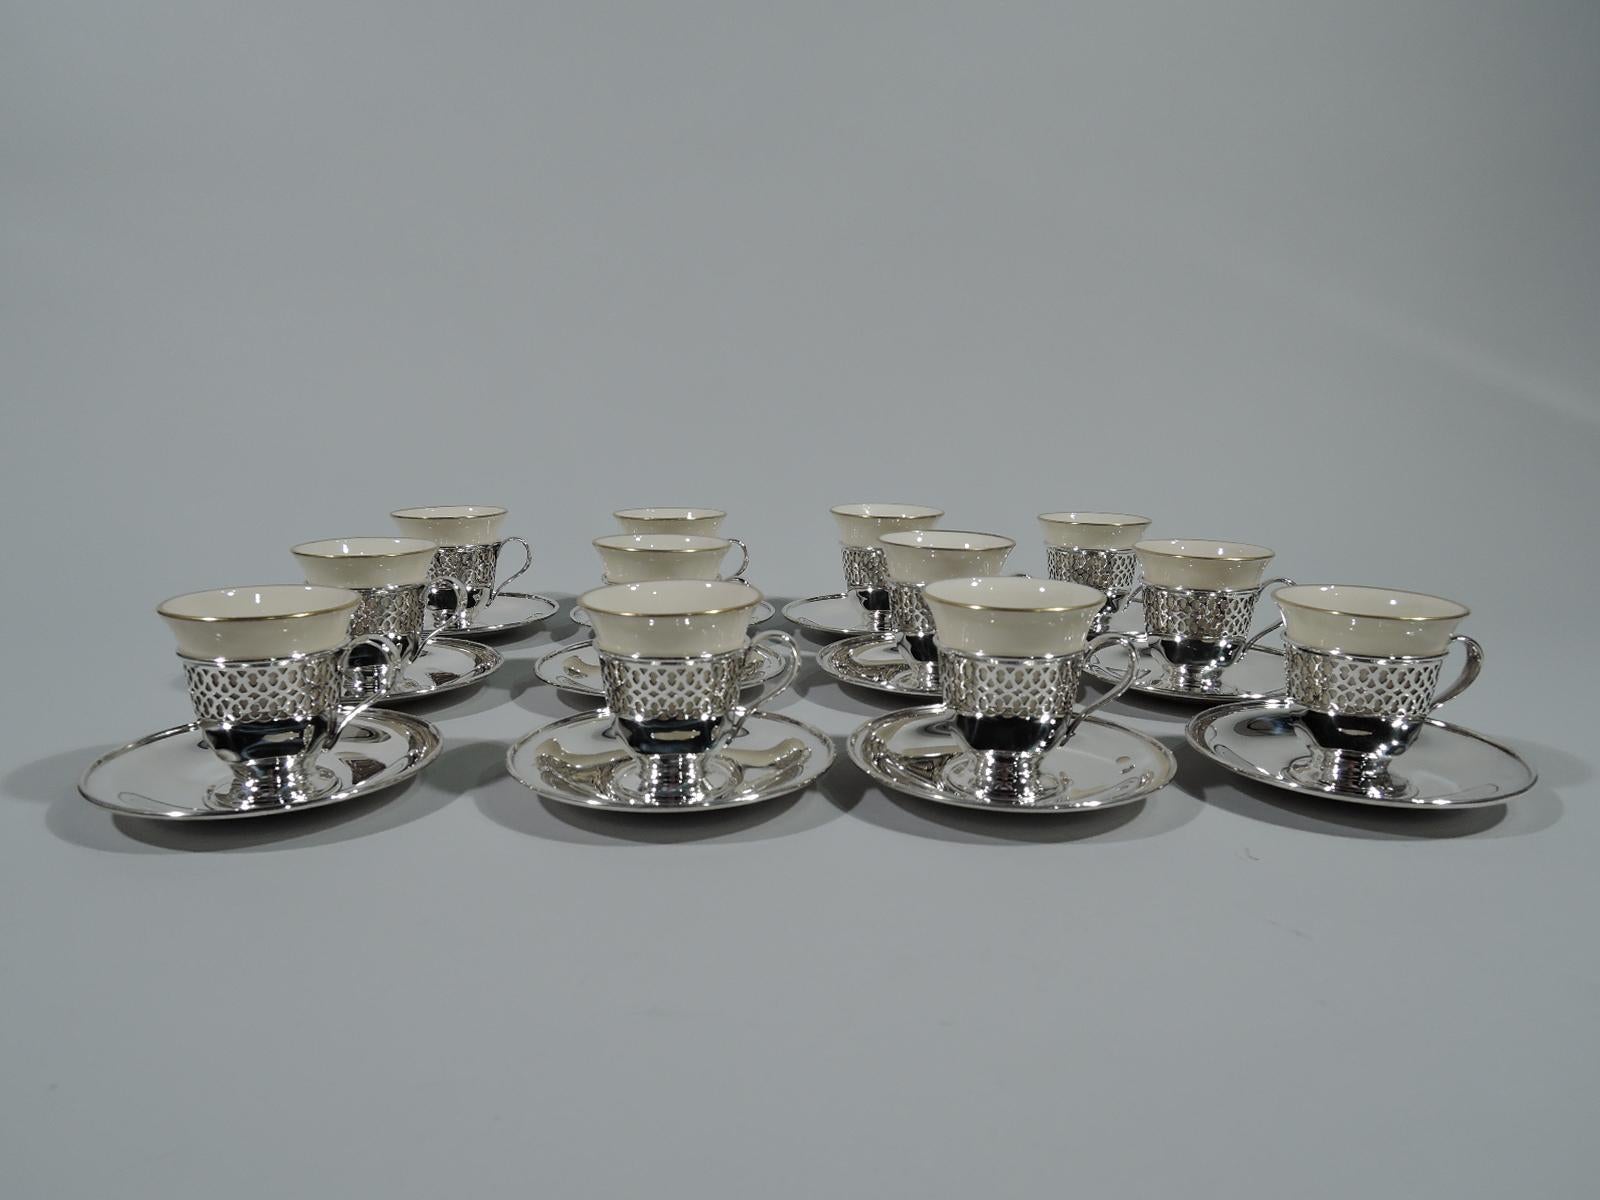 Set of 12 Edwardian sterling silver demitasse holders and saucers. Made by Tiffany & Co. in New York. Each holder: Tapering with high-looping handle and open and raised foot. Top part has pierced geometric ornament. Each saucer: Round and tapering